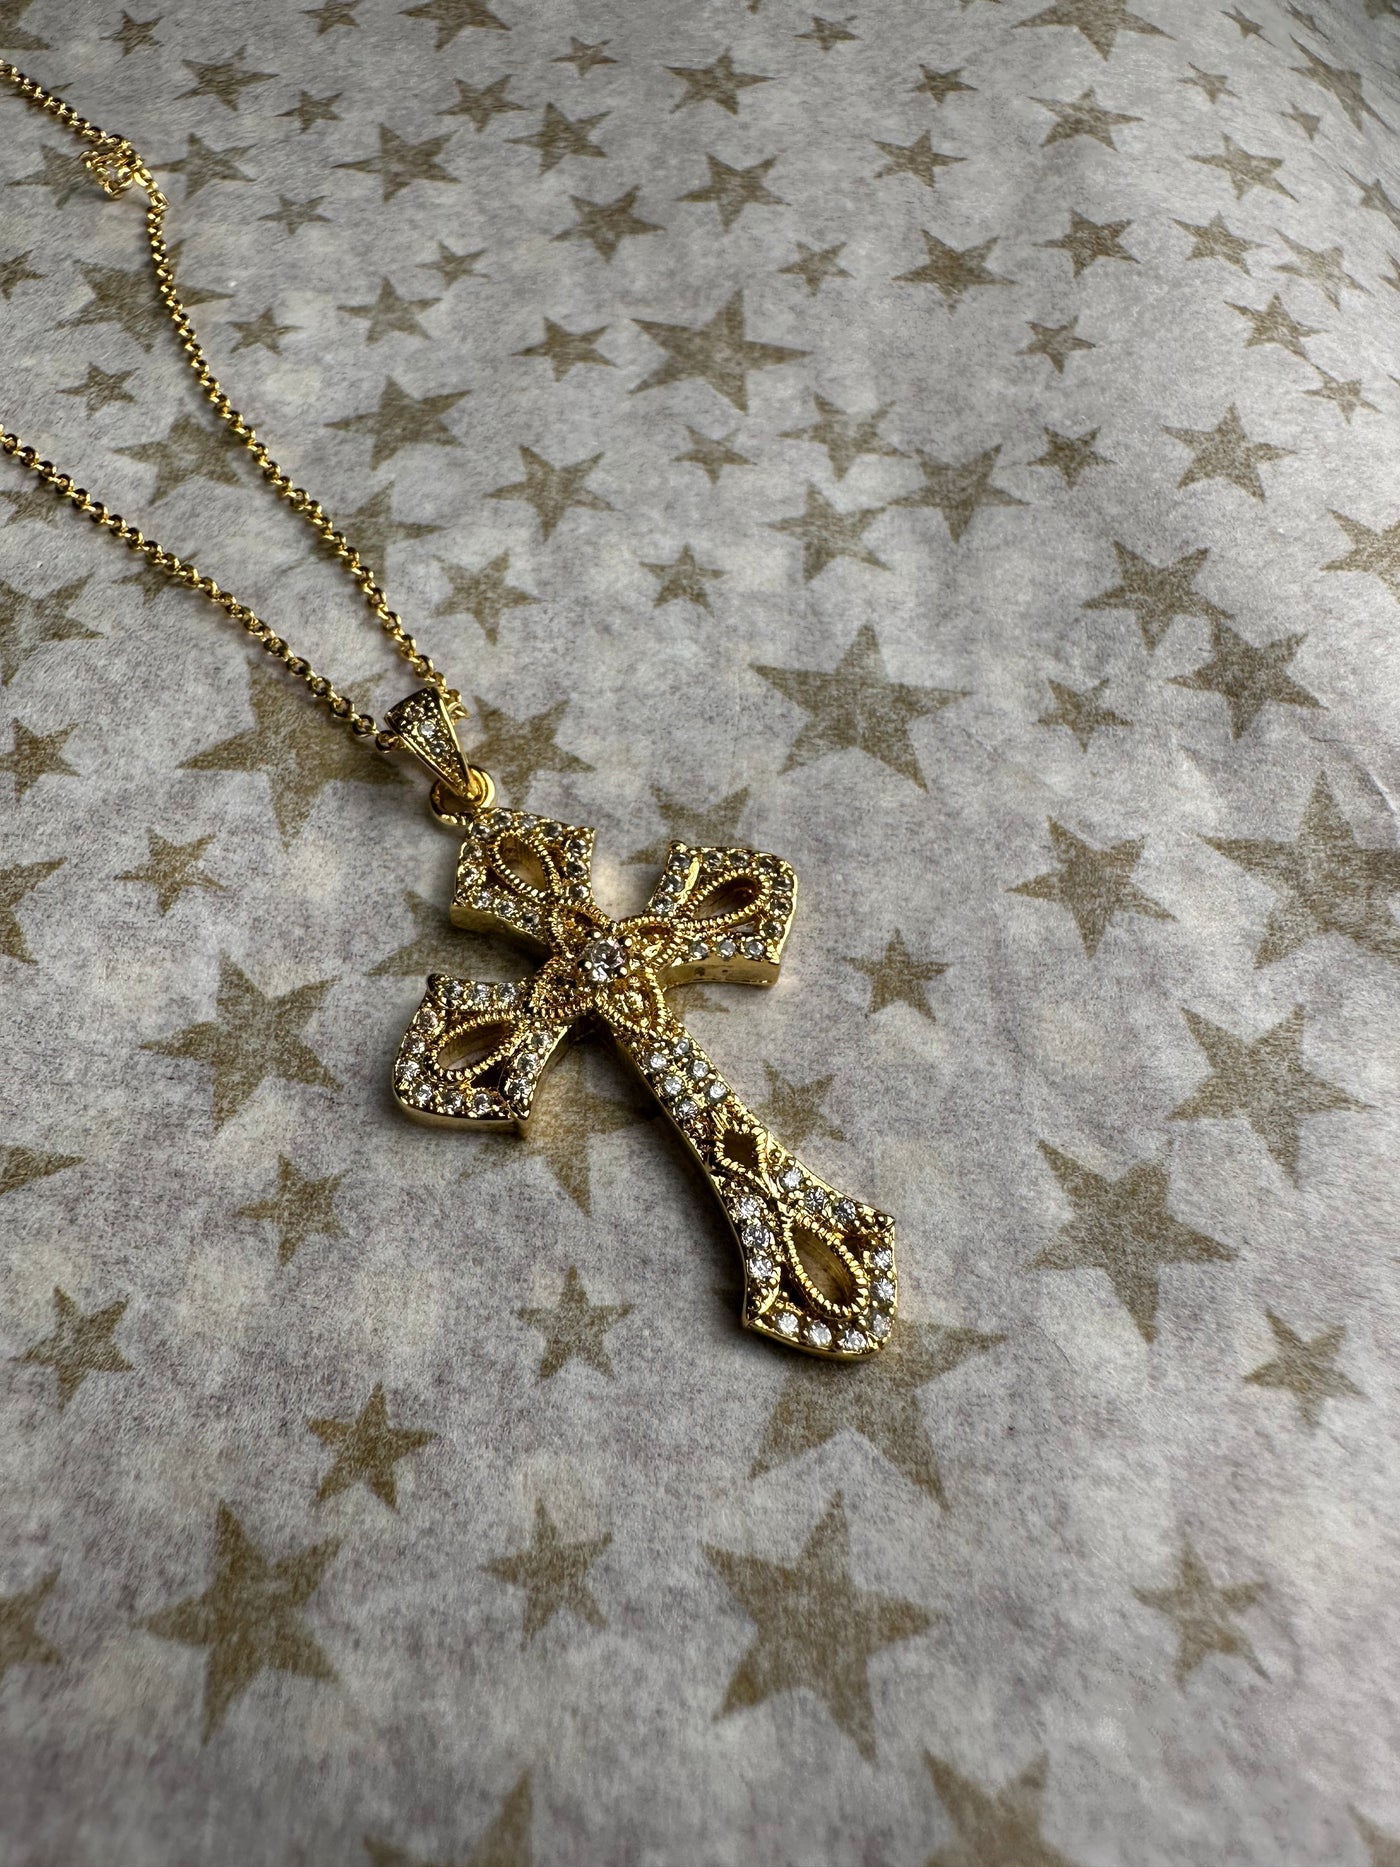 Pave Set Cubic Zirconia Ornate CZ Cross Pendant Necklace in Yellow Gold Tone